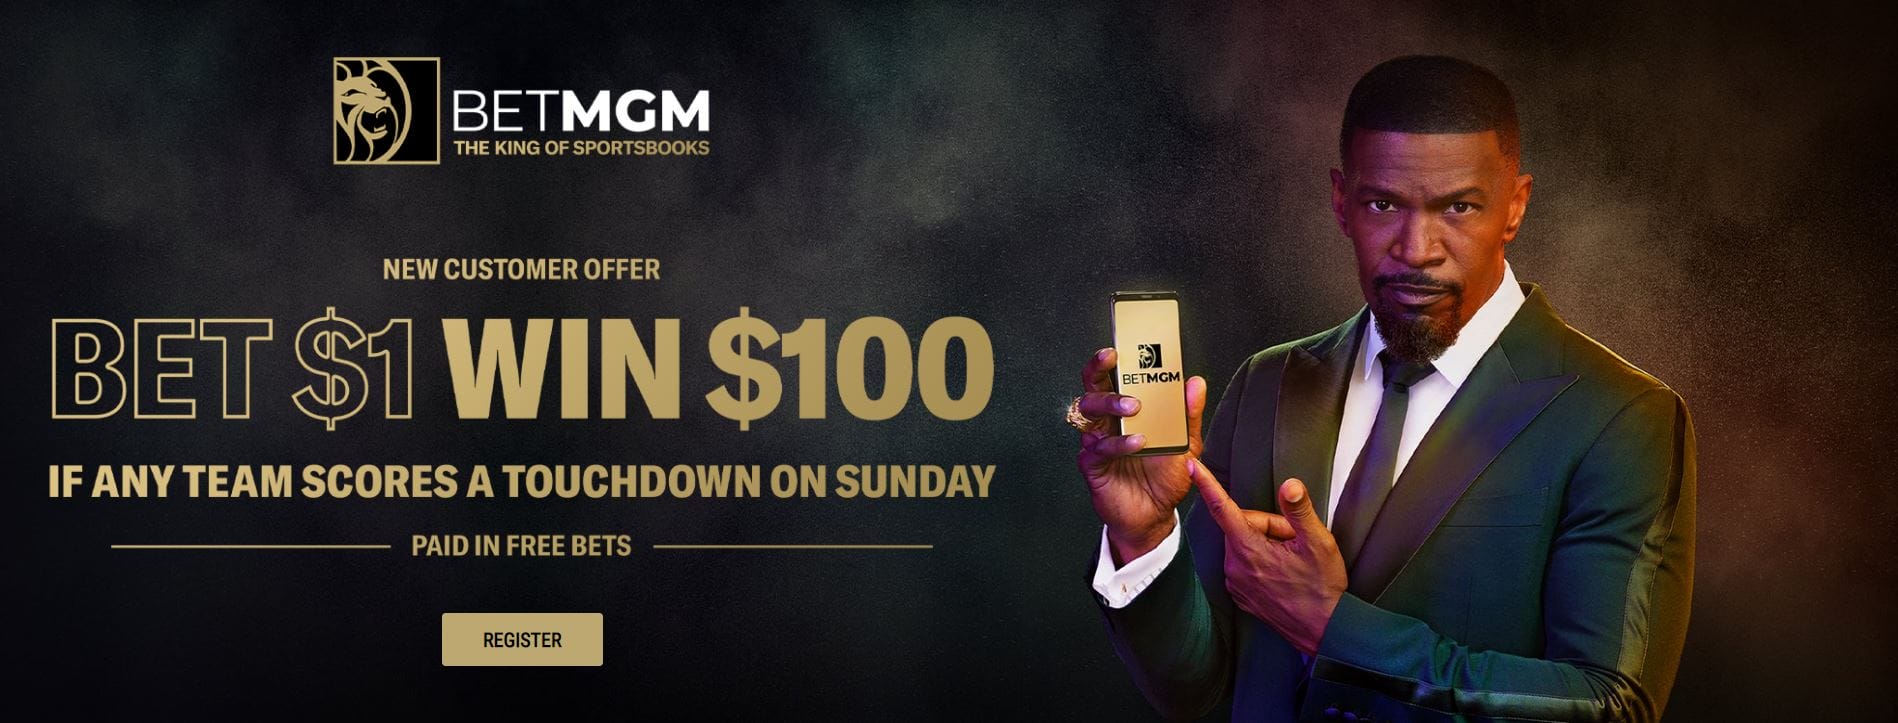 Bet $1 win $100, new customer offer for the Sunday games as part of the Jamie Foxx "The King of Sportsbooks" campaign